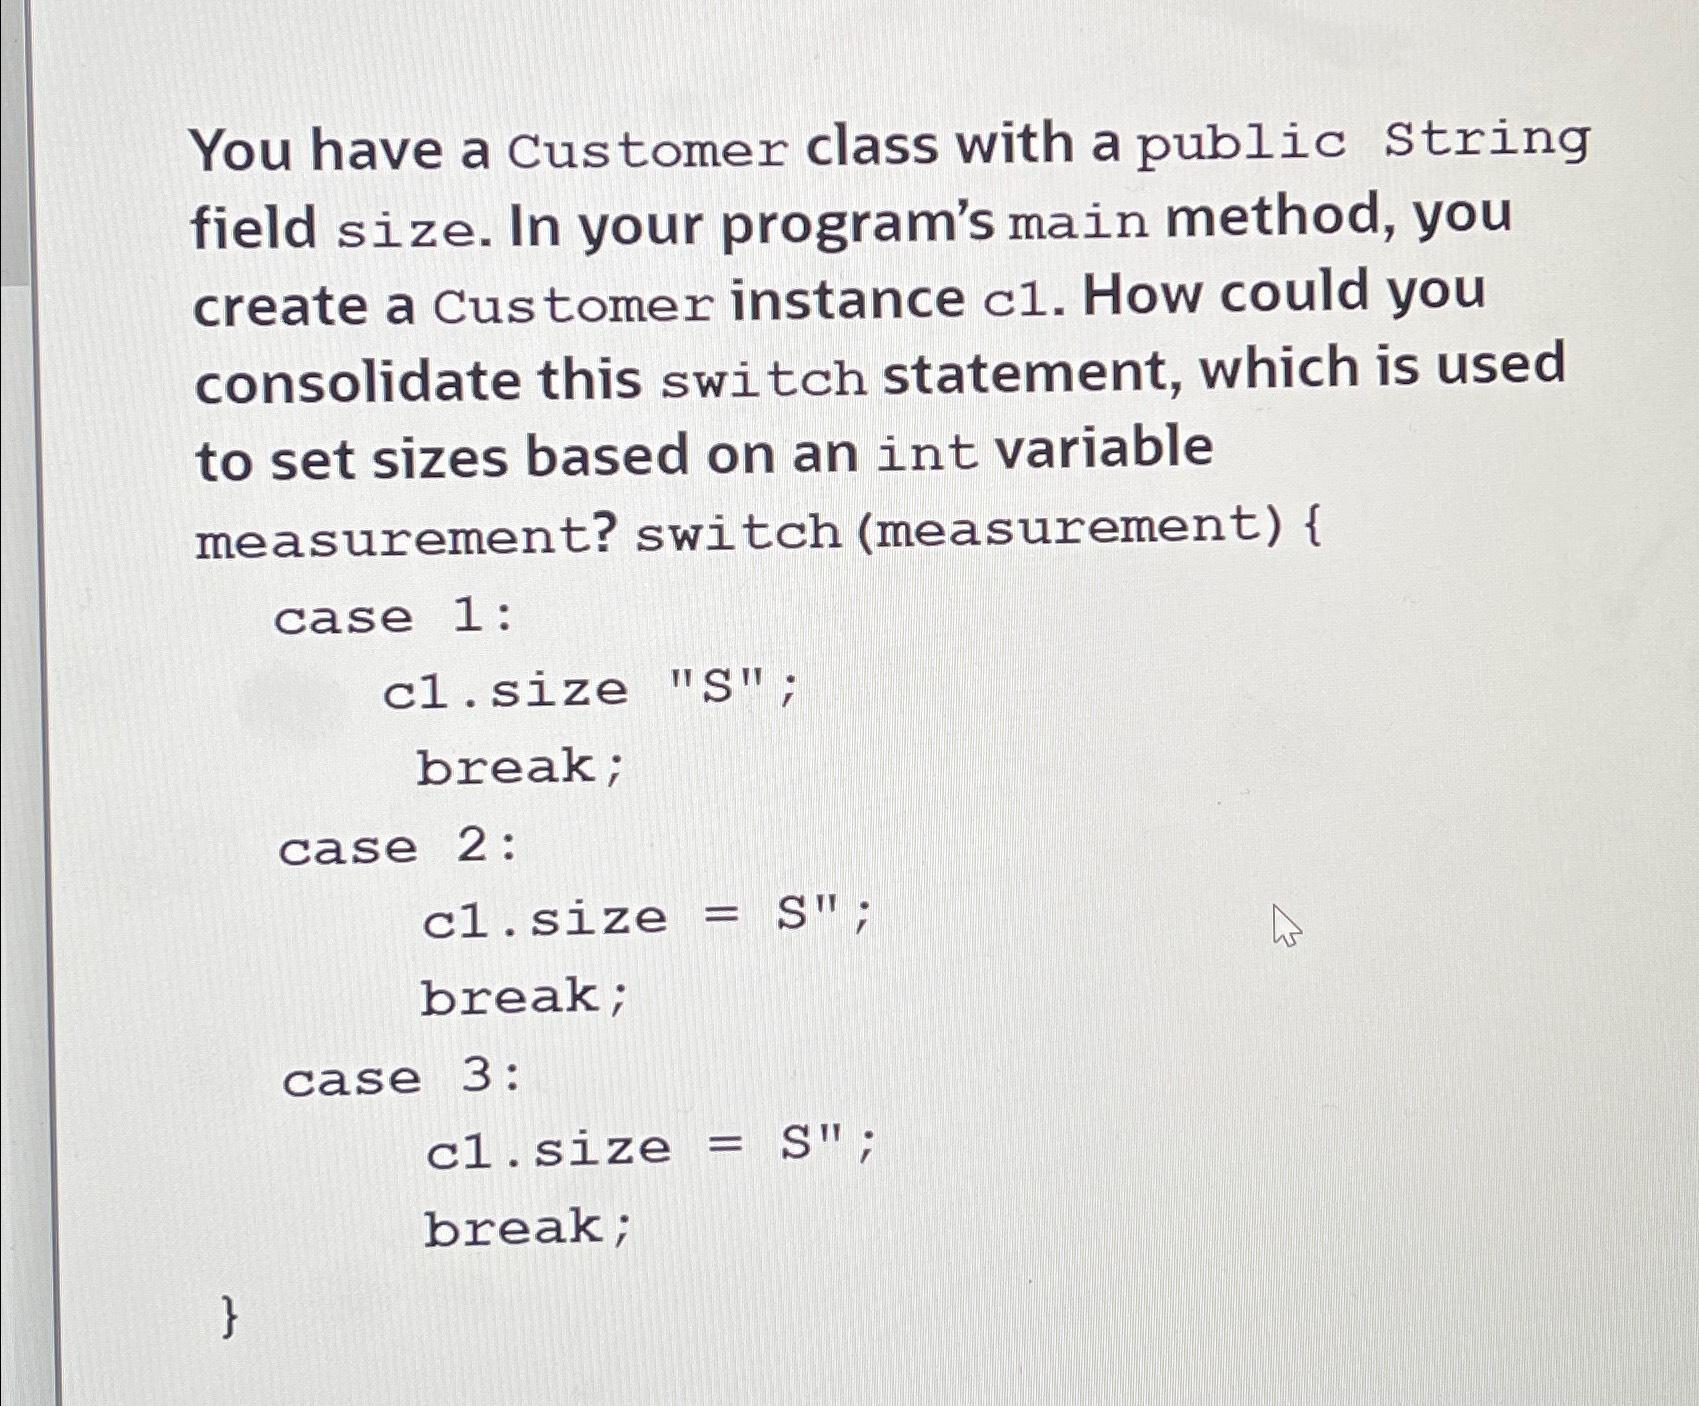 You have a Customer class with a public String field size. In your program's main method, you create a